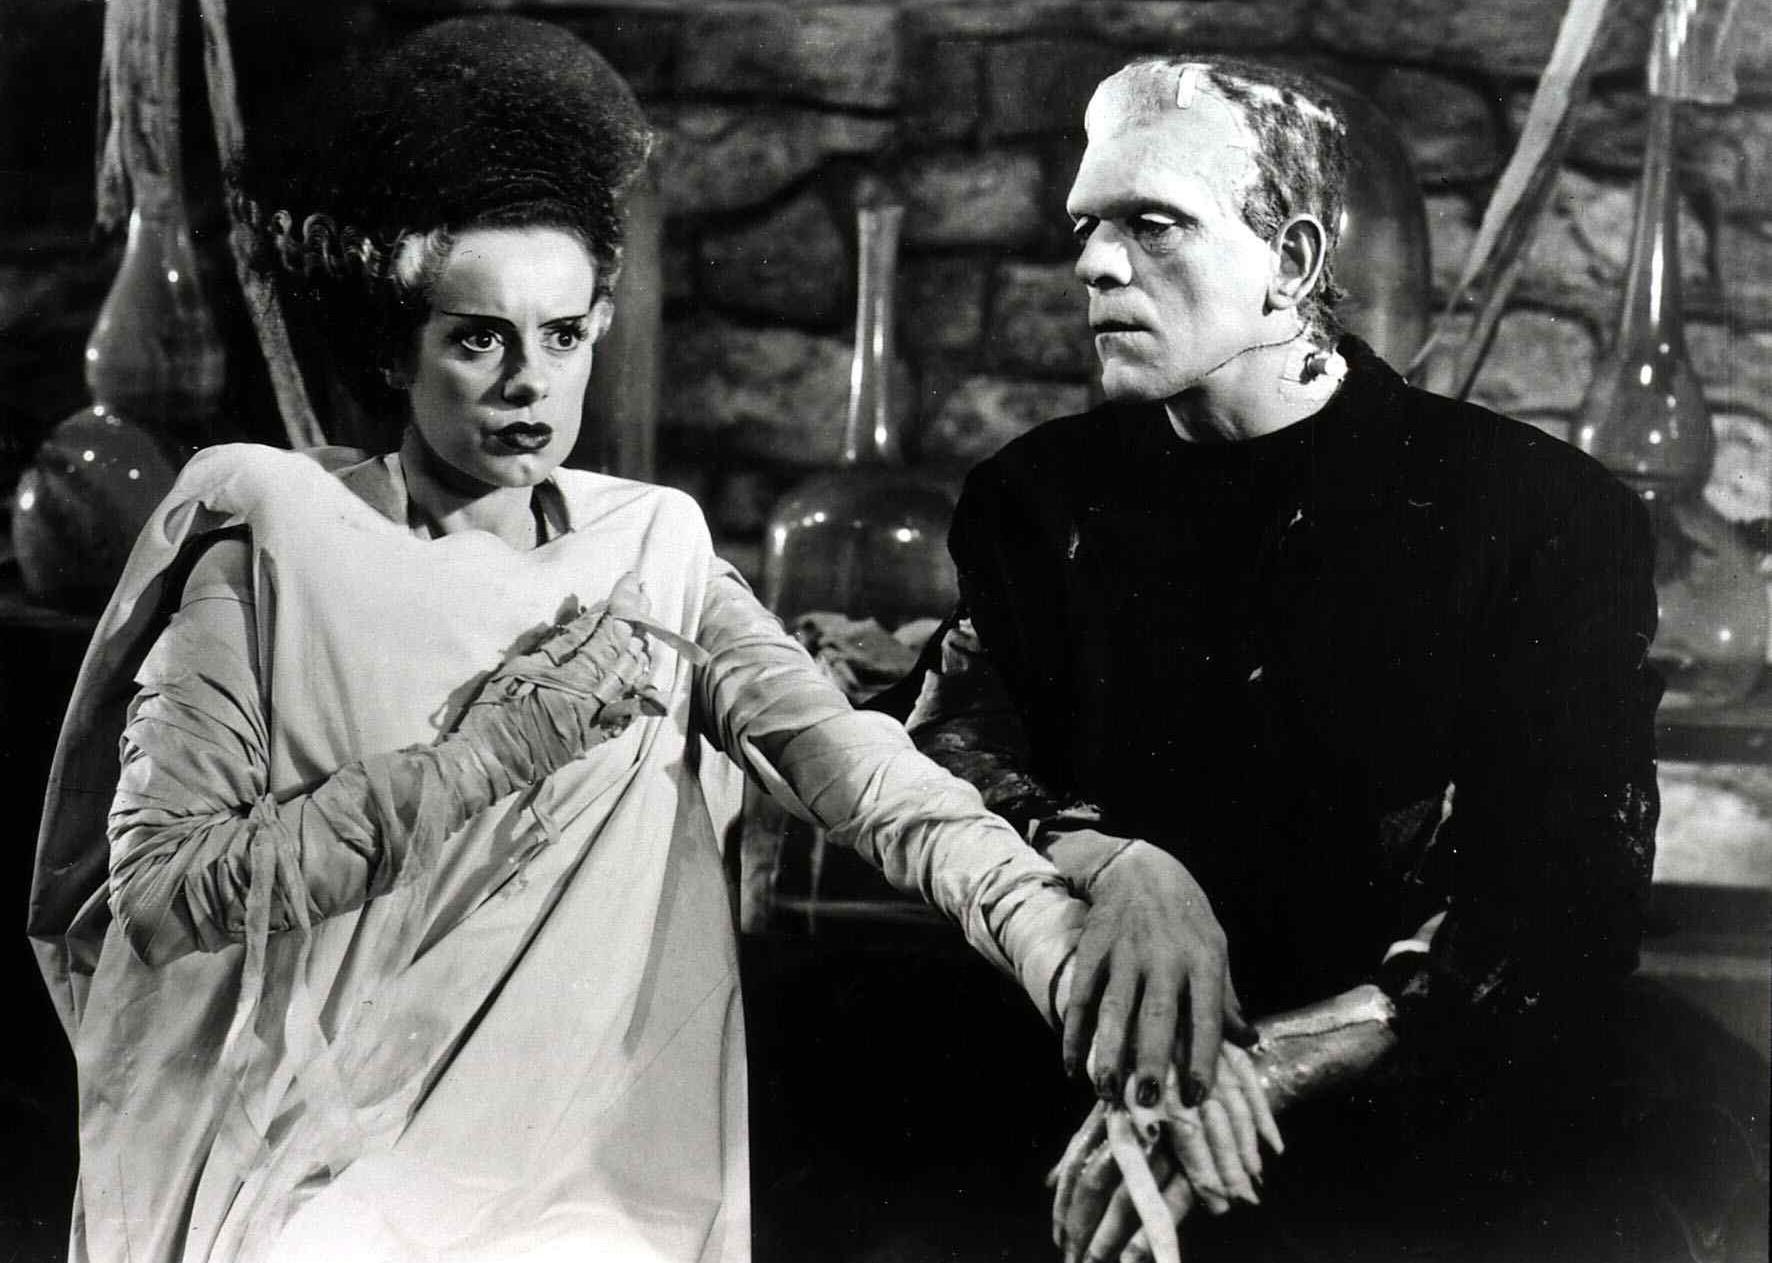 Frankenstein and his bride hold hands.